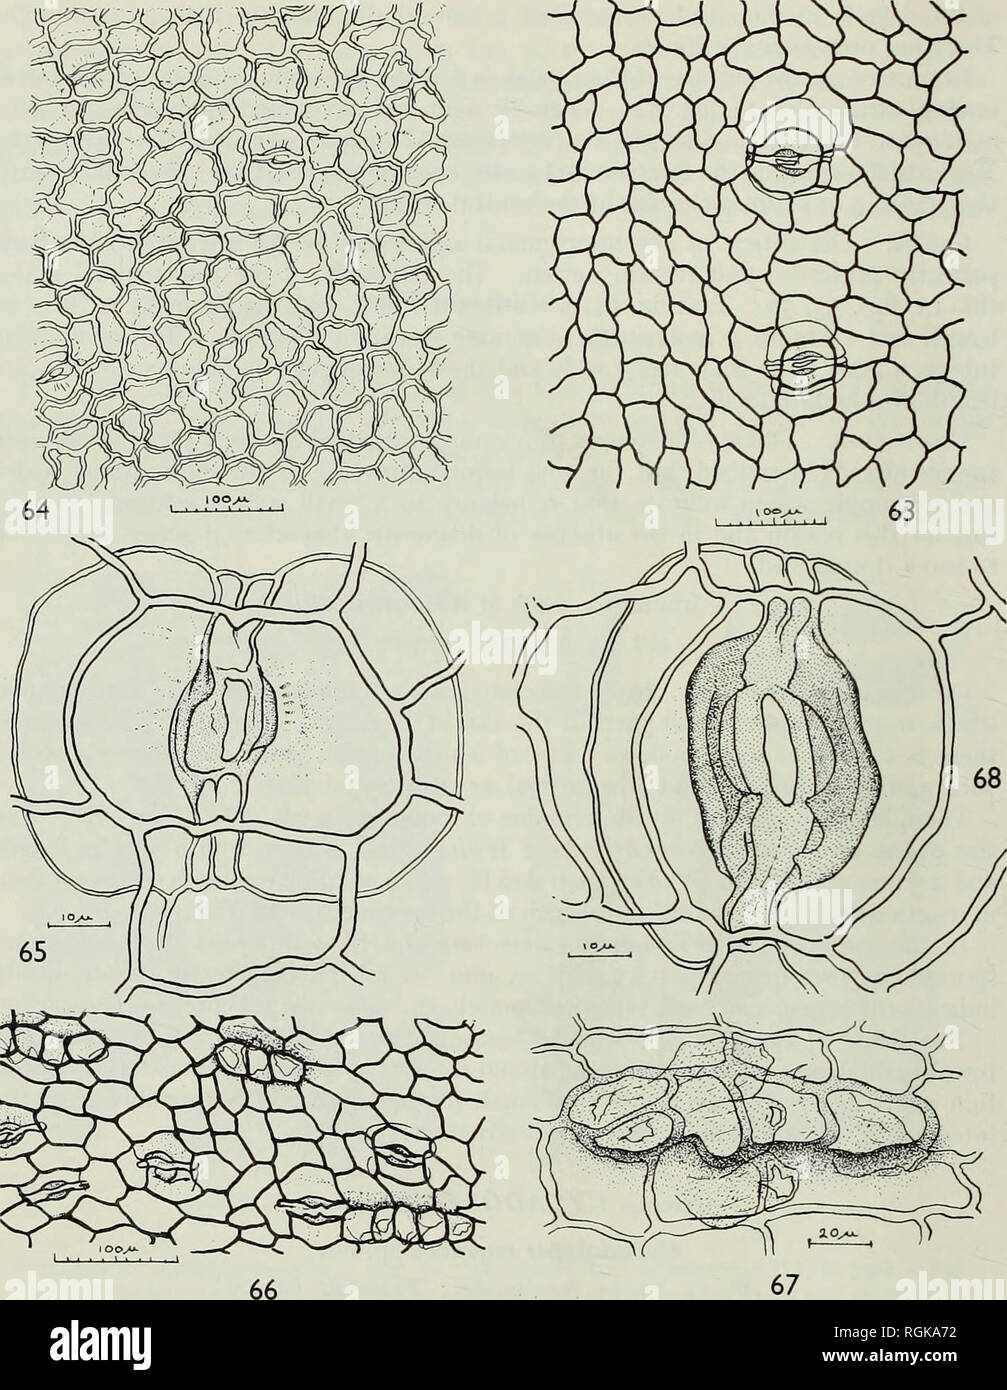 . Bulletin of the British Museum (Natural History), Geology. 3© FOSSIL BENNETTITALES FROM TICO, ARGENTINA. Figs. 63-68. Cvcadolepis coriacea sp. nov. Fig. 63. Adaxial epidermis with transverse stomata. B.M. (N.H.), V.45384. Fig. 64. Abaxial epidermis with thick-walled cells, sunken stomata and traces of hypodermal cells. B.M. (N.H.), V.45384. Fig. 65. Stoma from adaxial epidermis. B.M. (N.H.), V.45384. Fig. 66. Abaxial epidermis showing grouped hairs. BAPB 7924. Fig. 67. Details of grouped hairs. BAPB 7924. Fig. 68. Stoma of marginal region of bract. BAPB 7928.. Please note that these images a Stock Photo